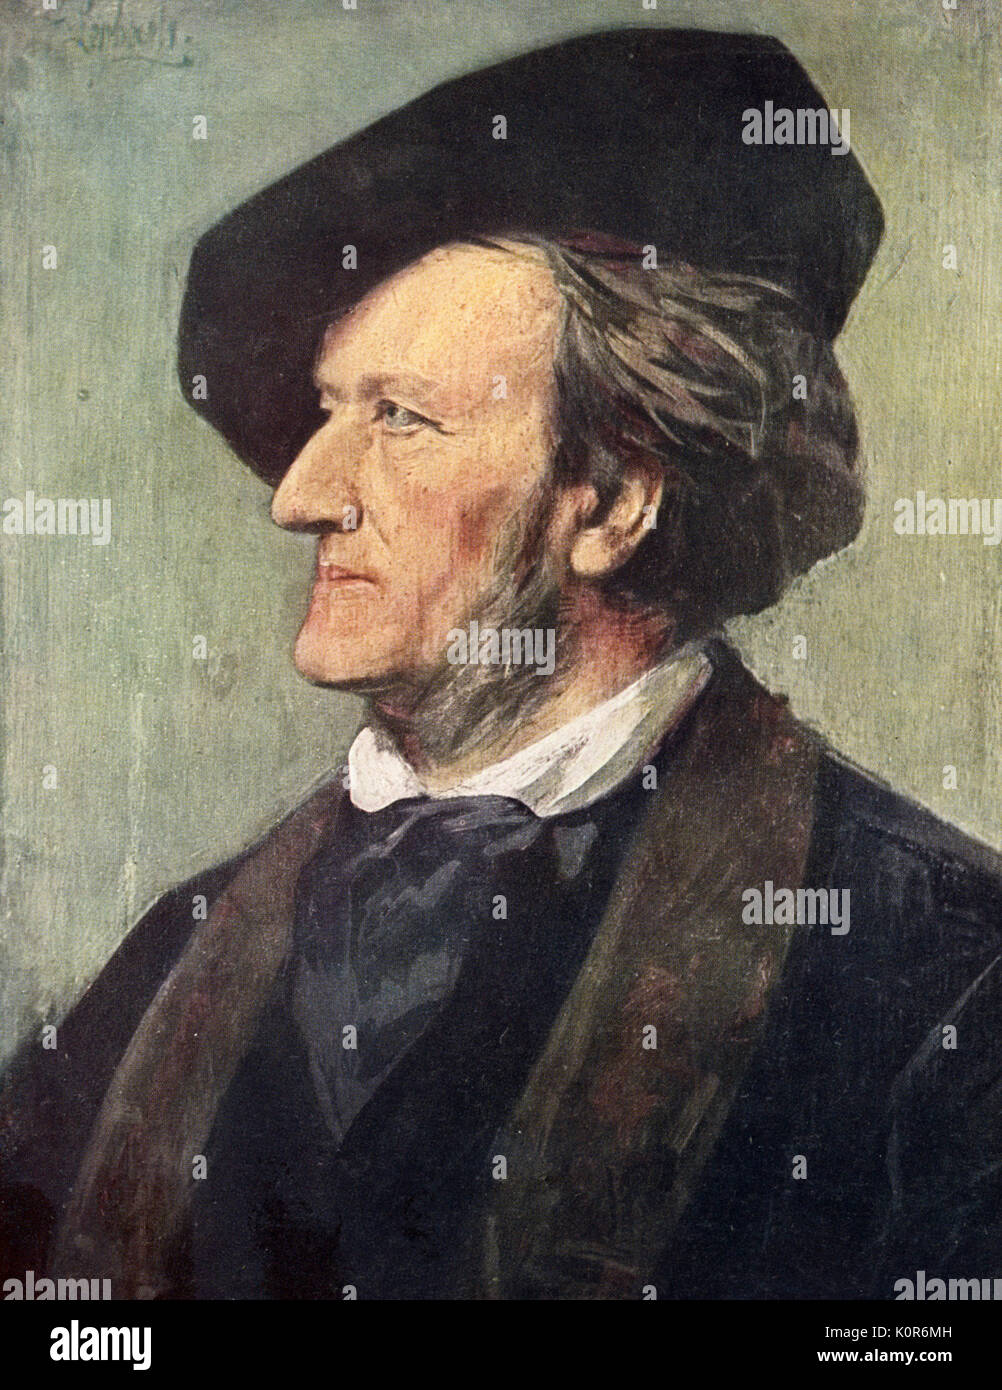 Richard Wagner - German composer. Portrait by Lenbach. (1813-1883). Stock Photo